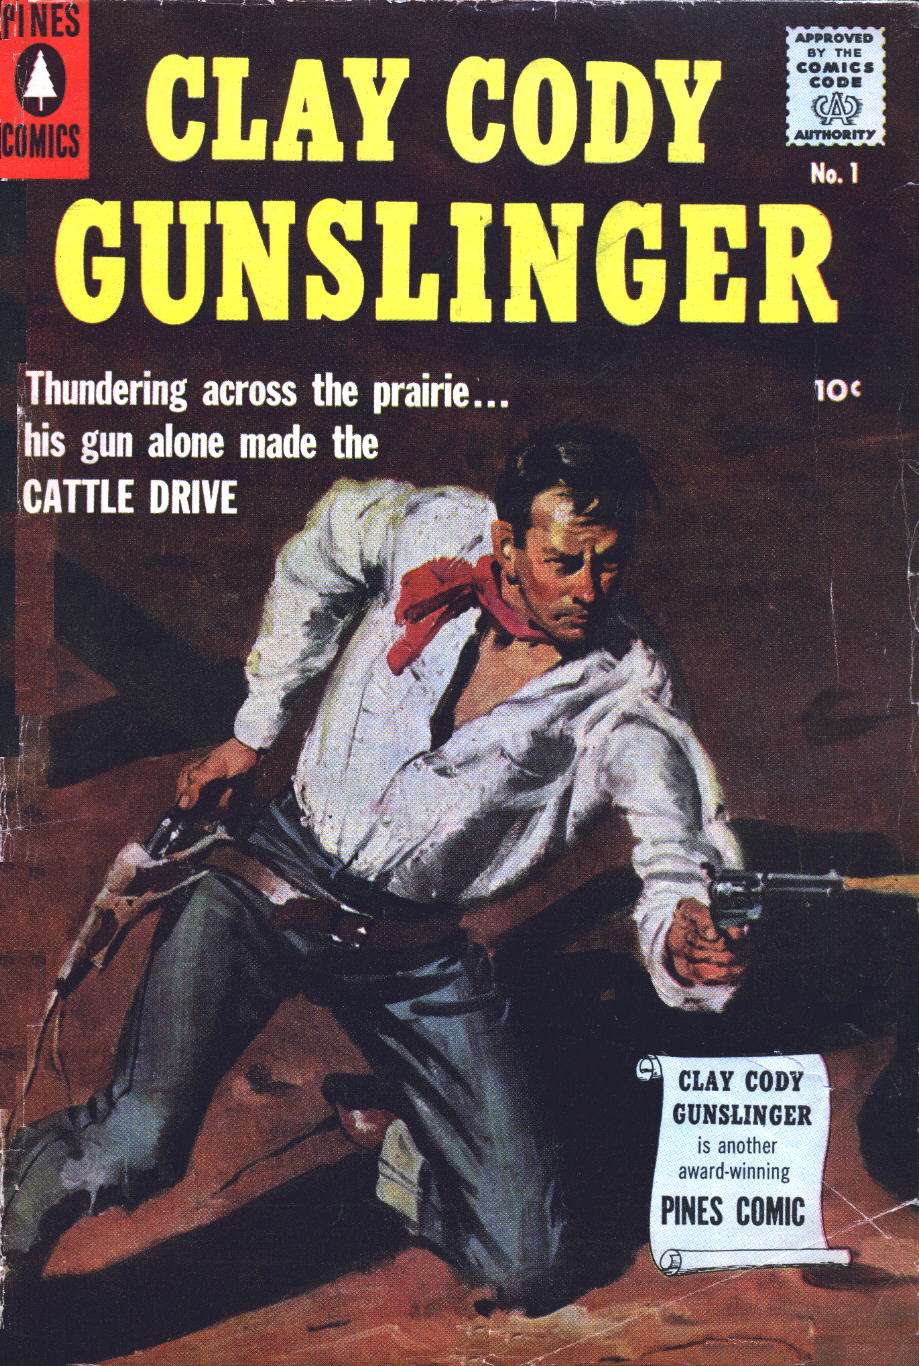 Comic Book Cover For Clay Cody Gunslinger 1